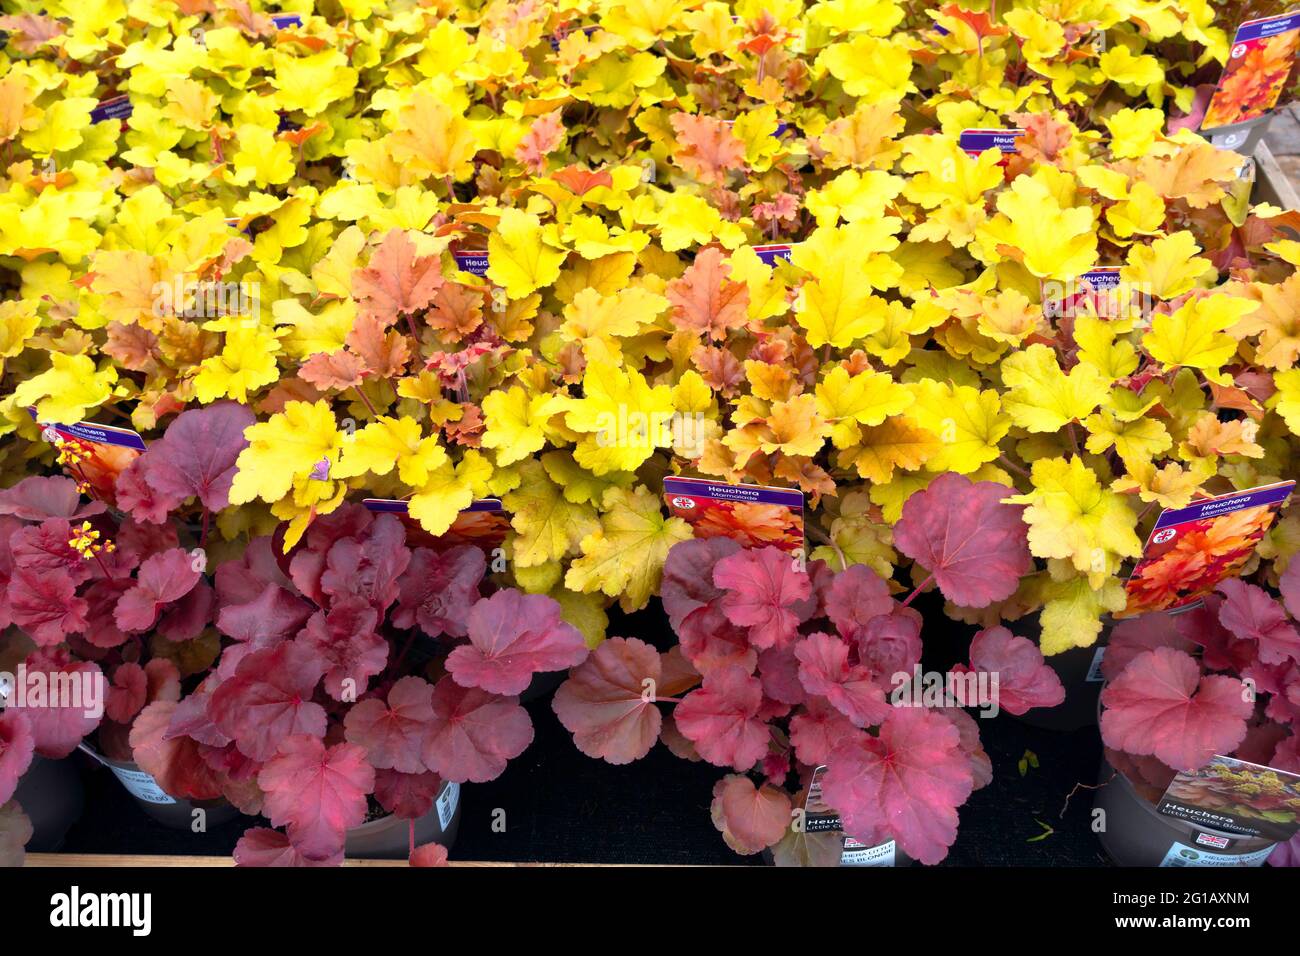 A display of Heuchera Marmalade plants for sale in a North Yorkshire Garden Centre useful for filling spaces between larger plants Stock Photo